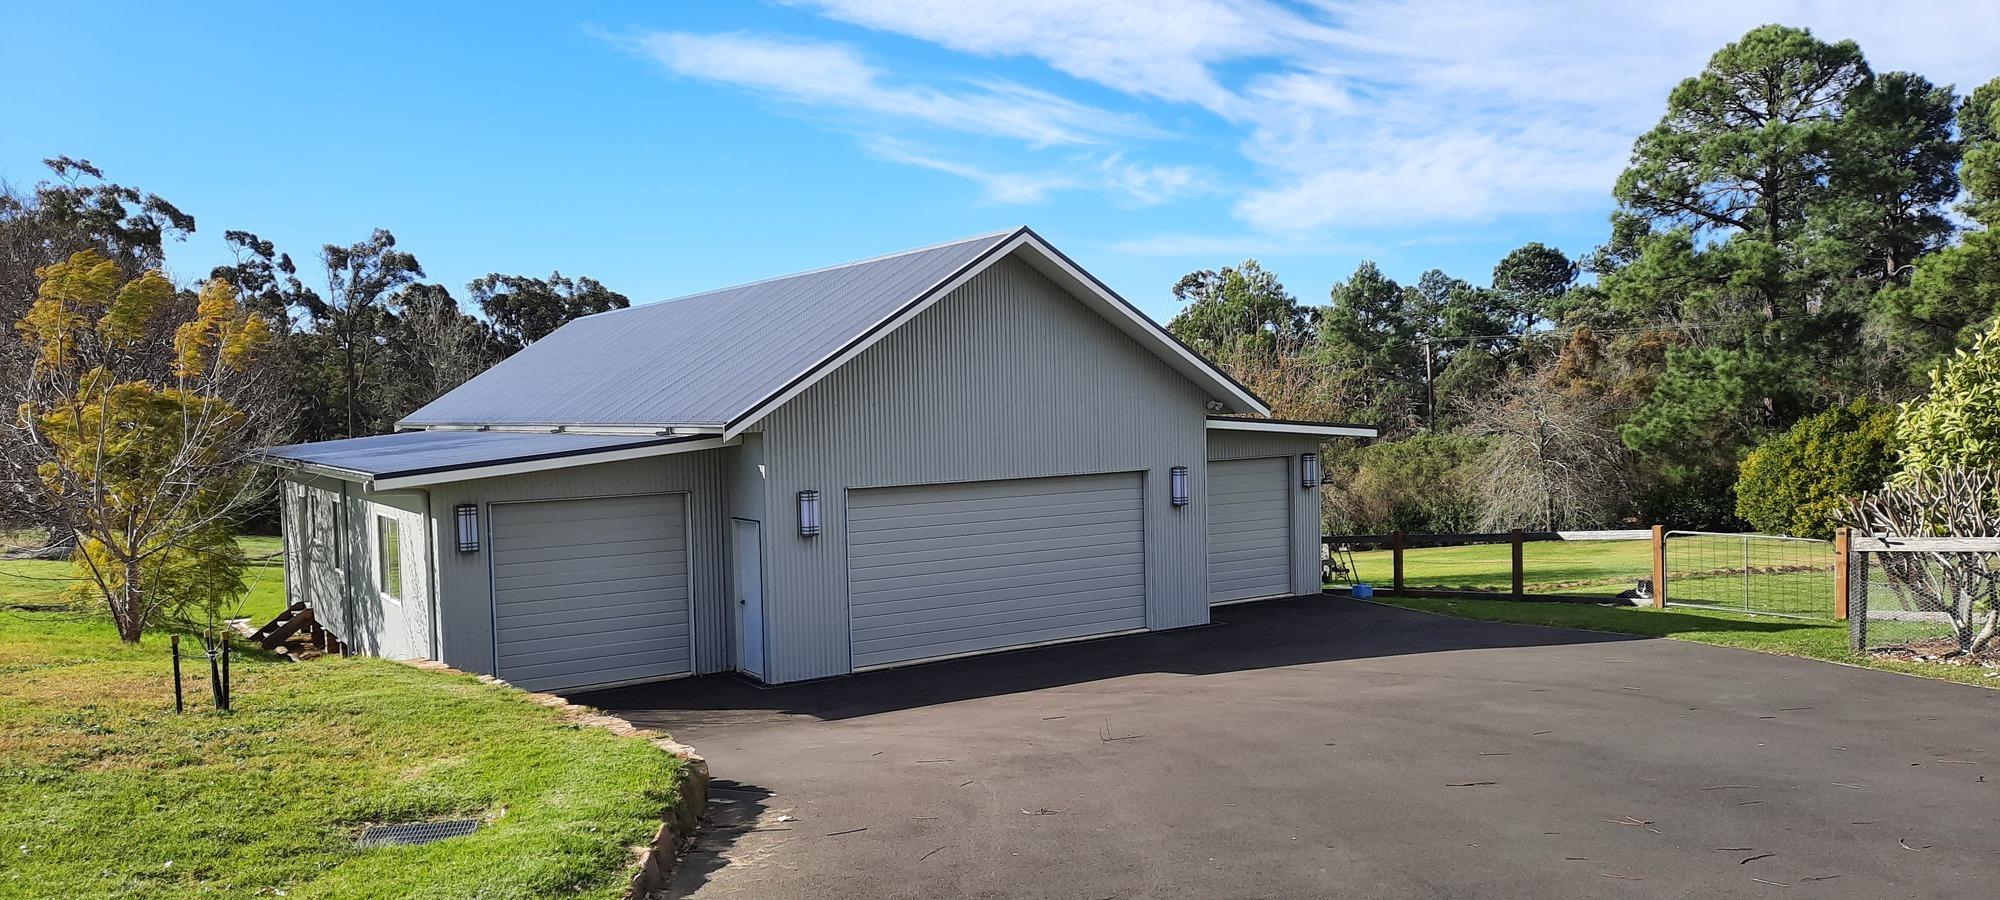 Caroline from Arcadia, NSW loves COLORBOND® steel Roofing, Guttering & Fascia, Garage Doors, Walling in colours Ironstone® Shale Grey® and Surfmist®